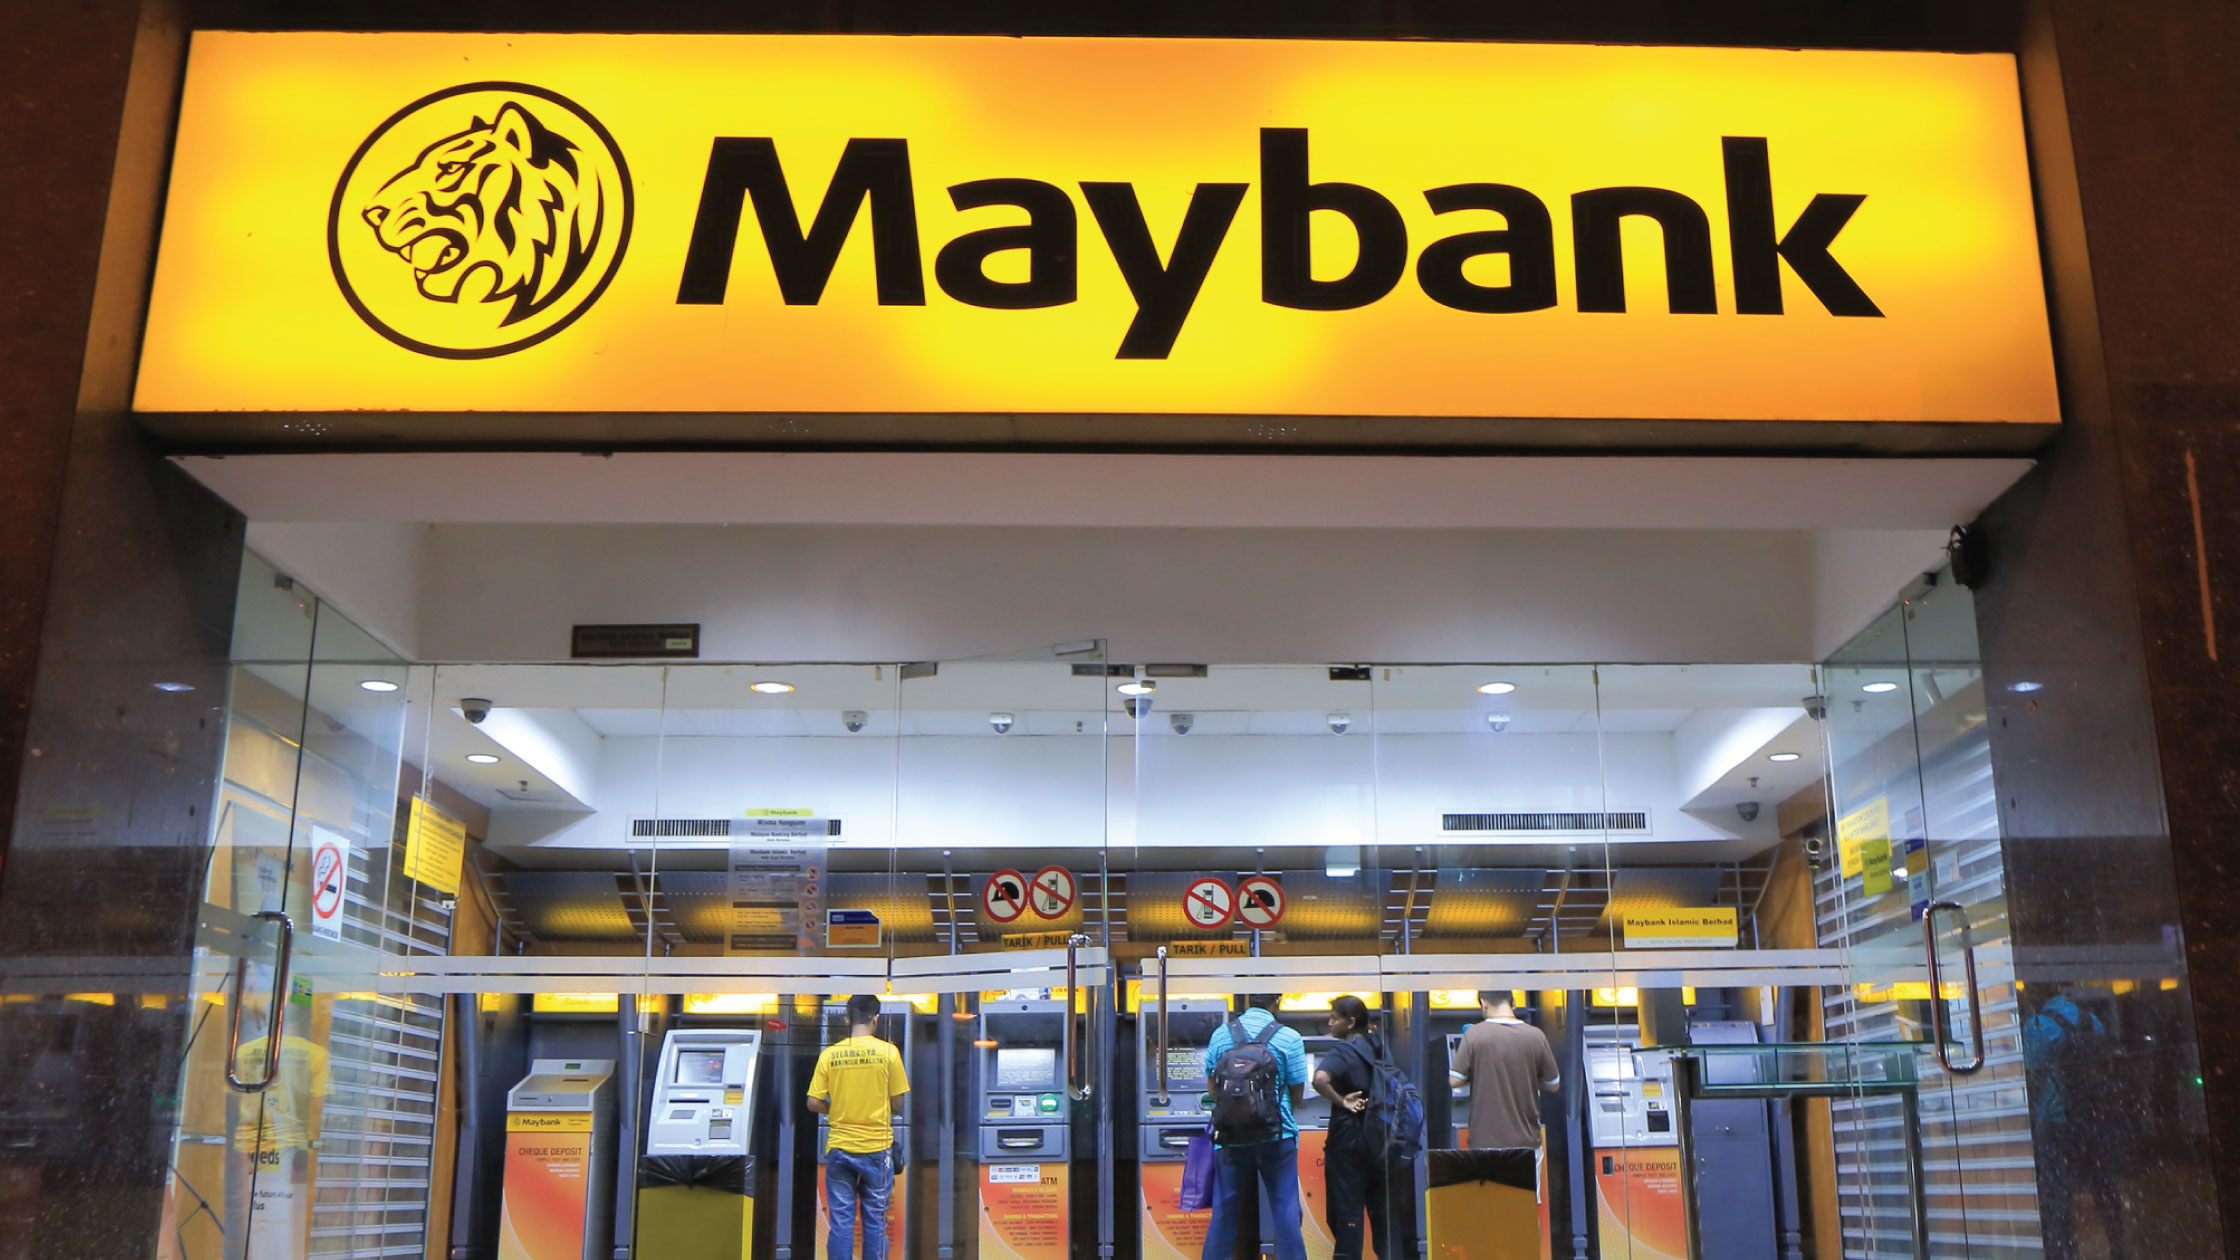 Broker’s Call: Maybank’s Q4 Revenue Expected to be Stronger, Maintain Add